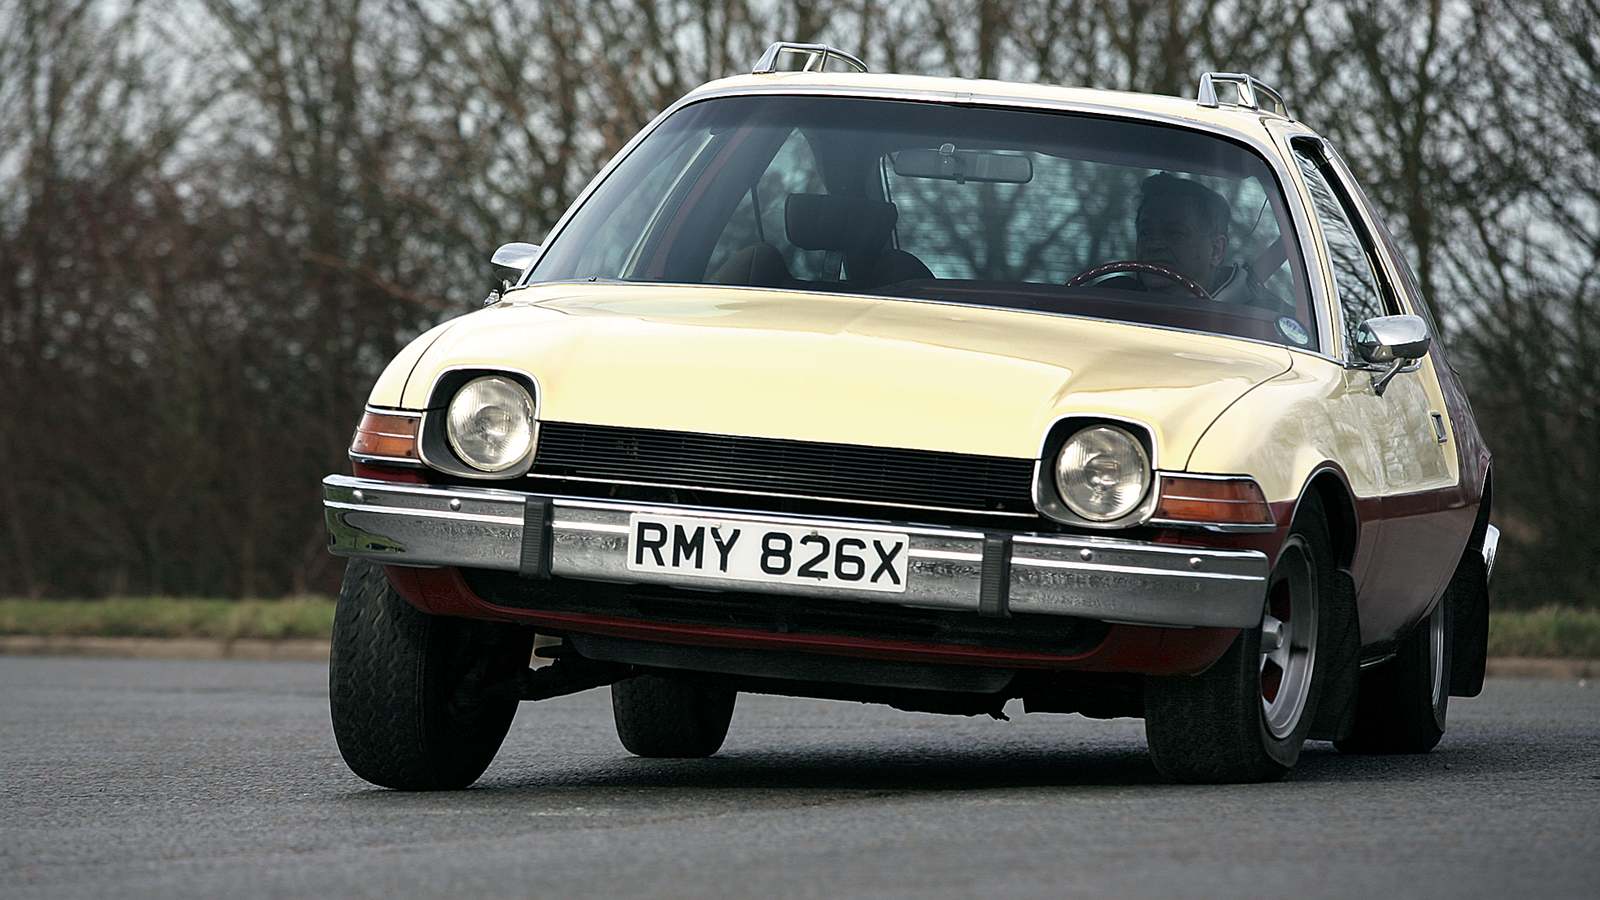 9 right-hand drive cars that were flawed by design